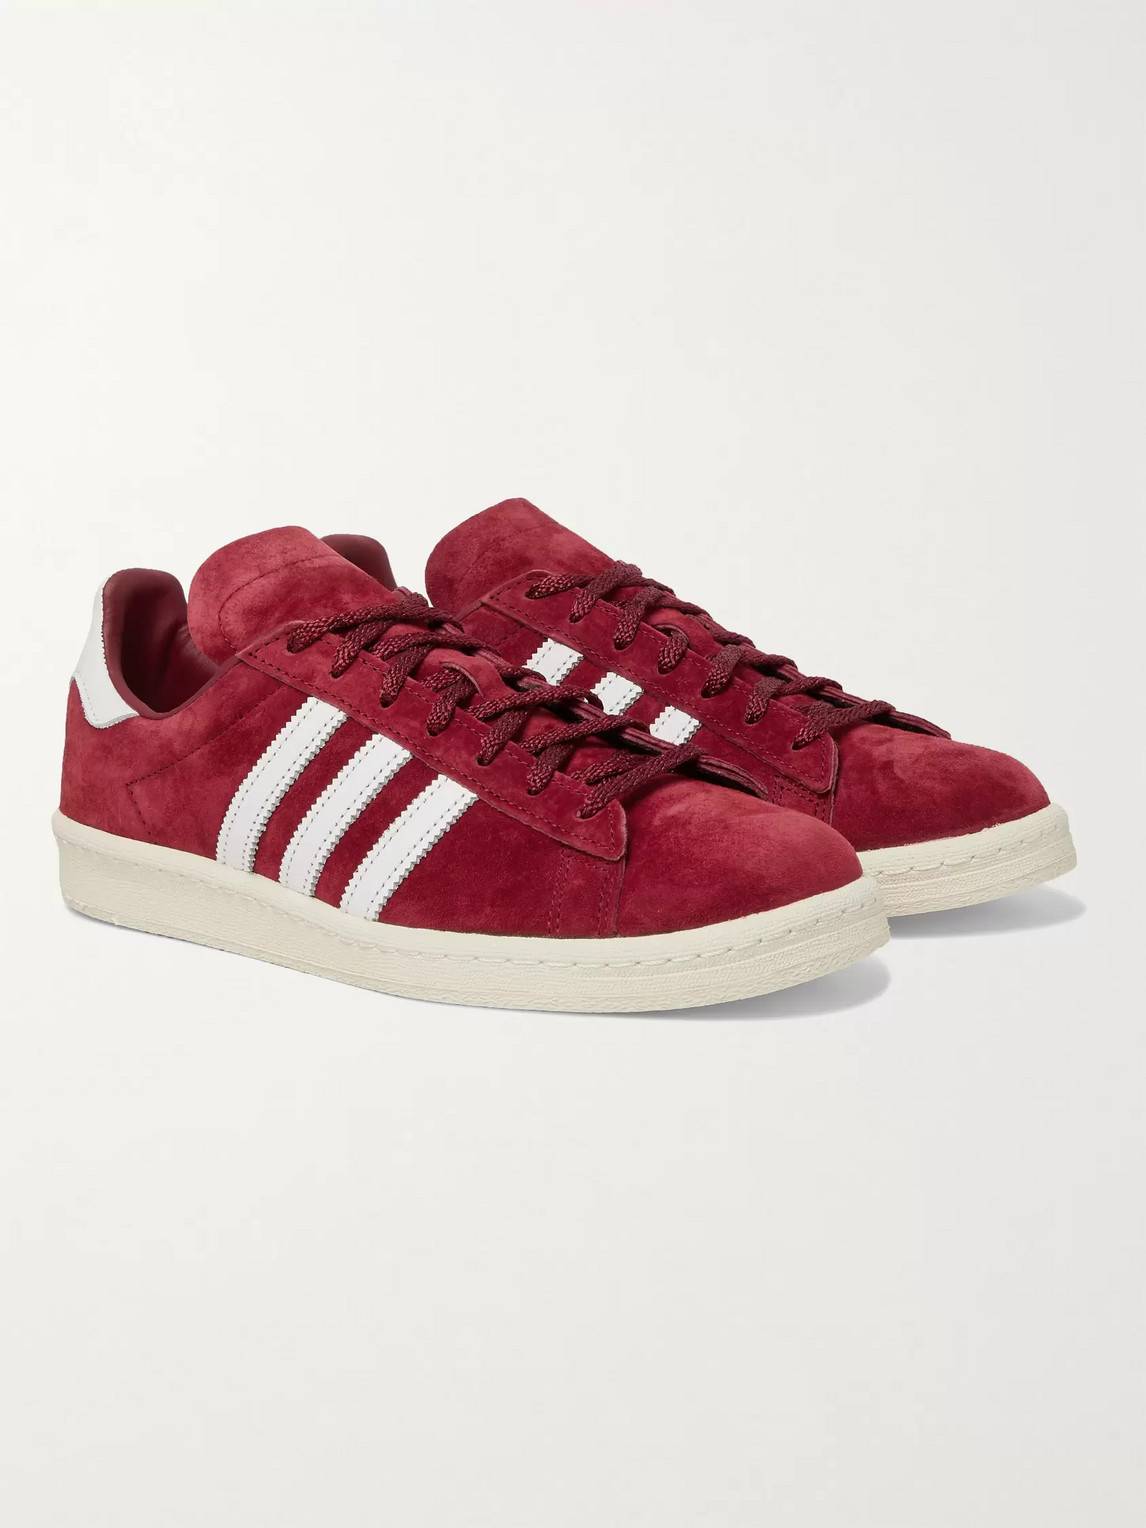 ADIDAS ORIGINALS CAMPUS 80S LEATHER-TRIMMED SUEDE SNEAKERS